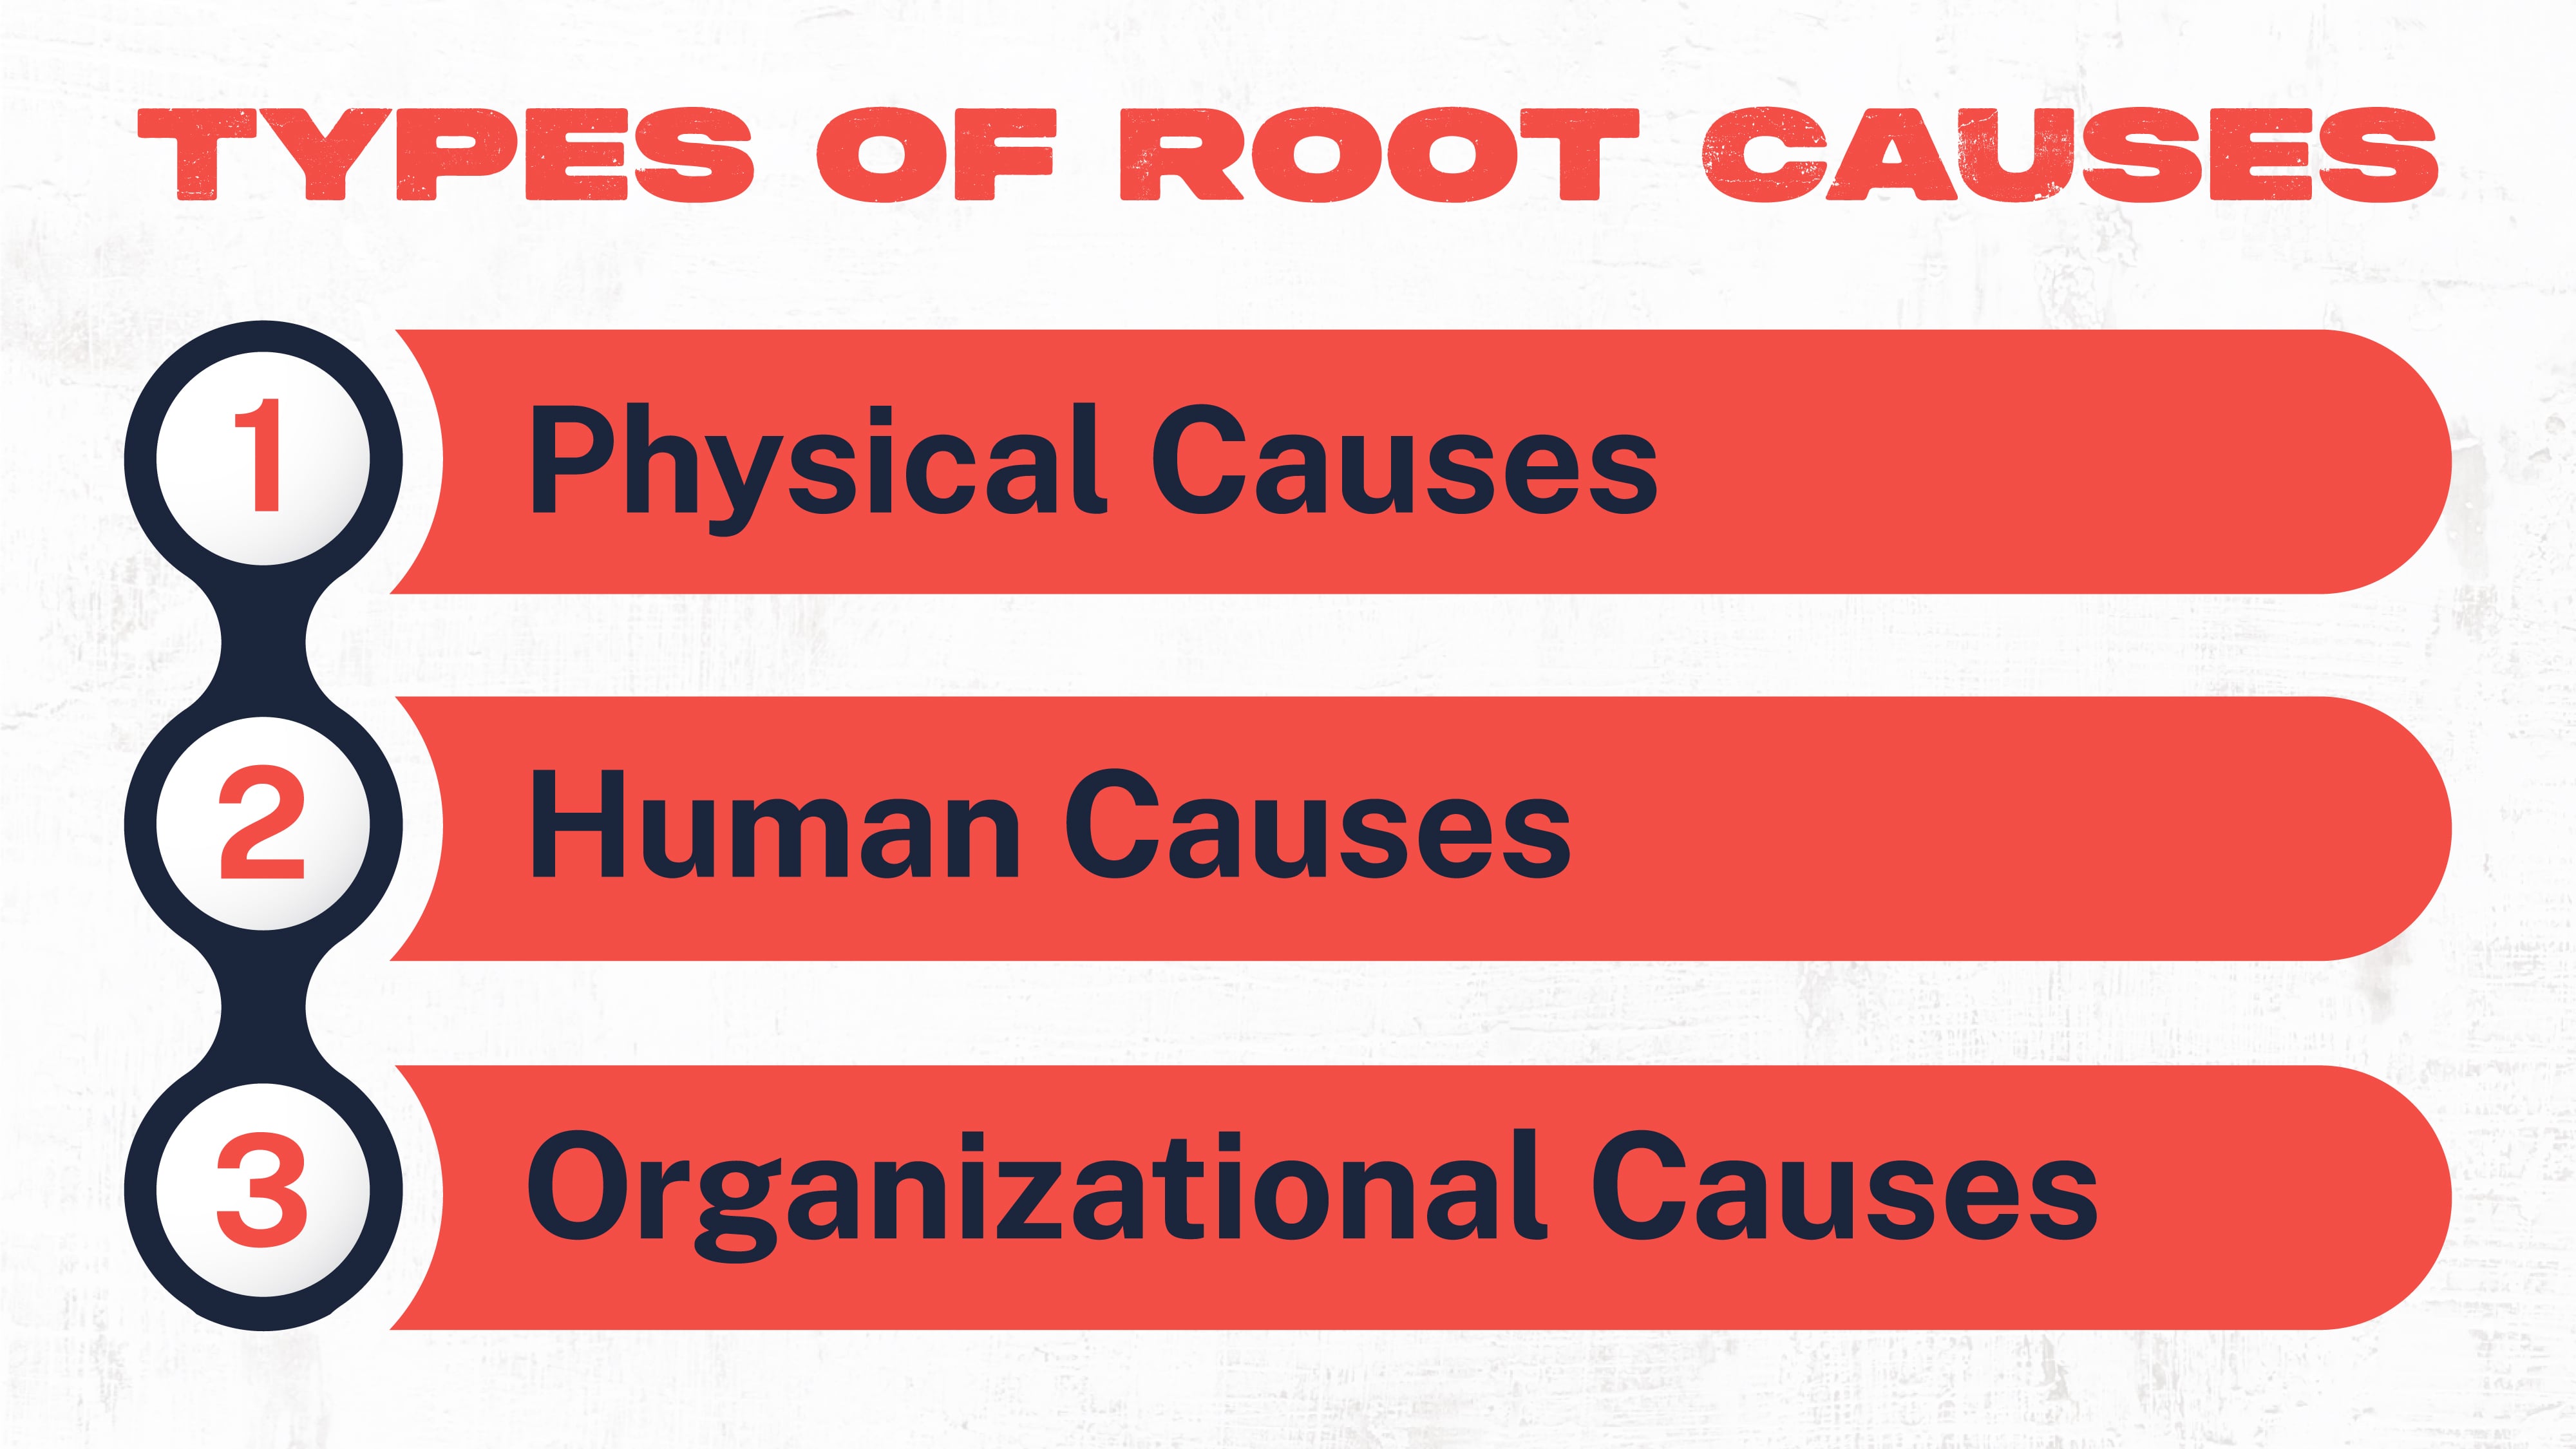 Types of Root Causes